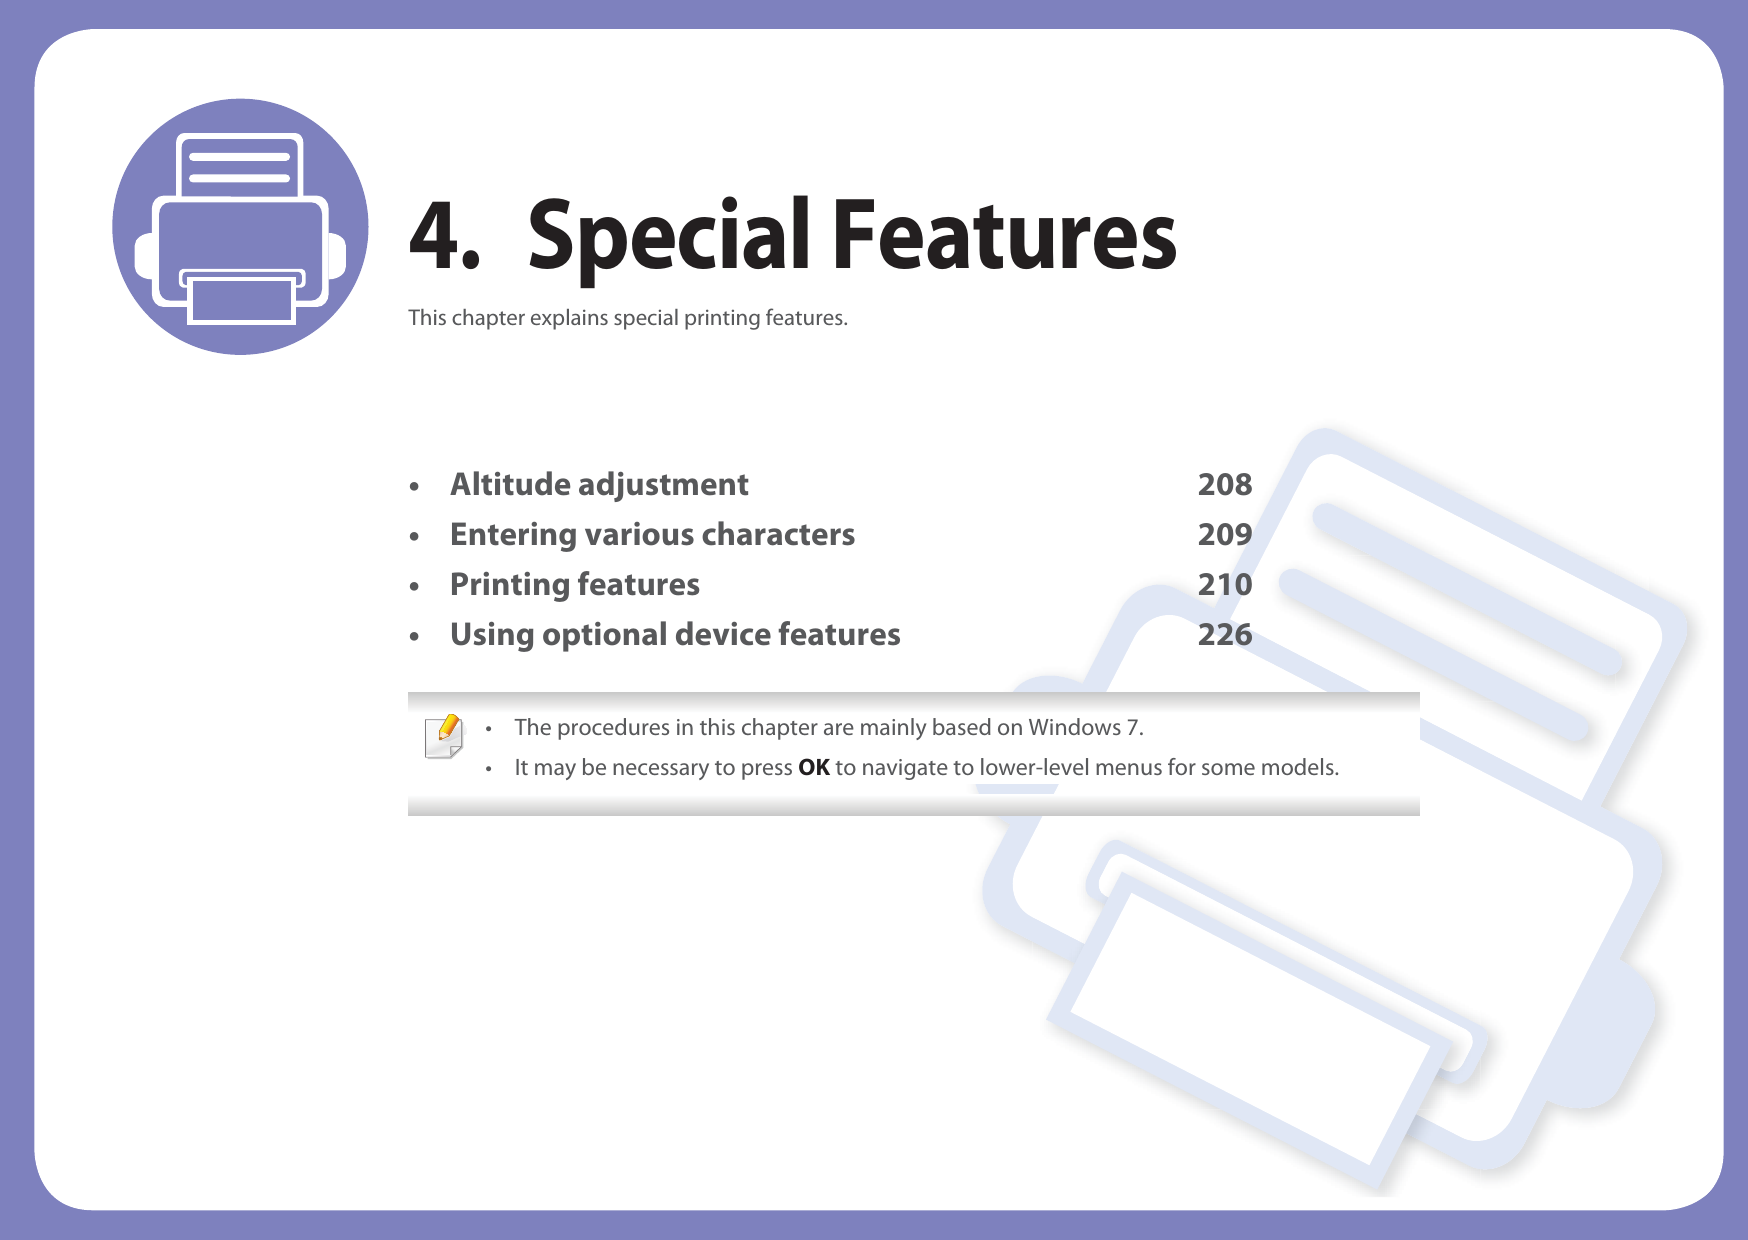 4. Special FeaturesThis chapter explains special printing features.• Altitude adjustment 208• Entering various characters 209• Printing features 210• Using optional device features 226 • The procedures in this chapter are mainly based on Windows 7.• It may be necessary to press OK to navigate to lower-level menus for some models. 